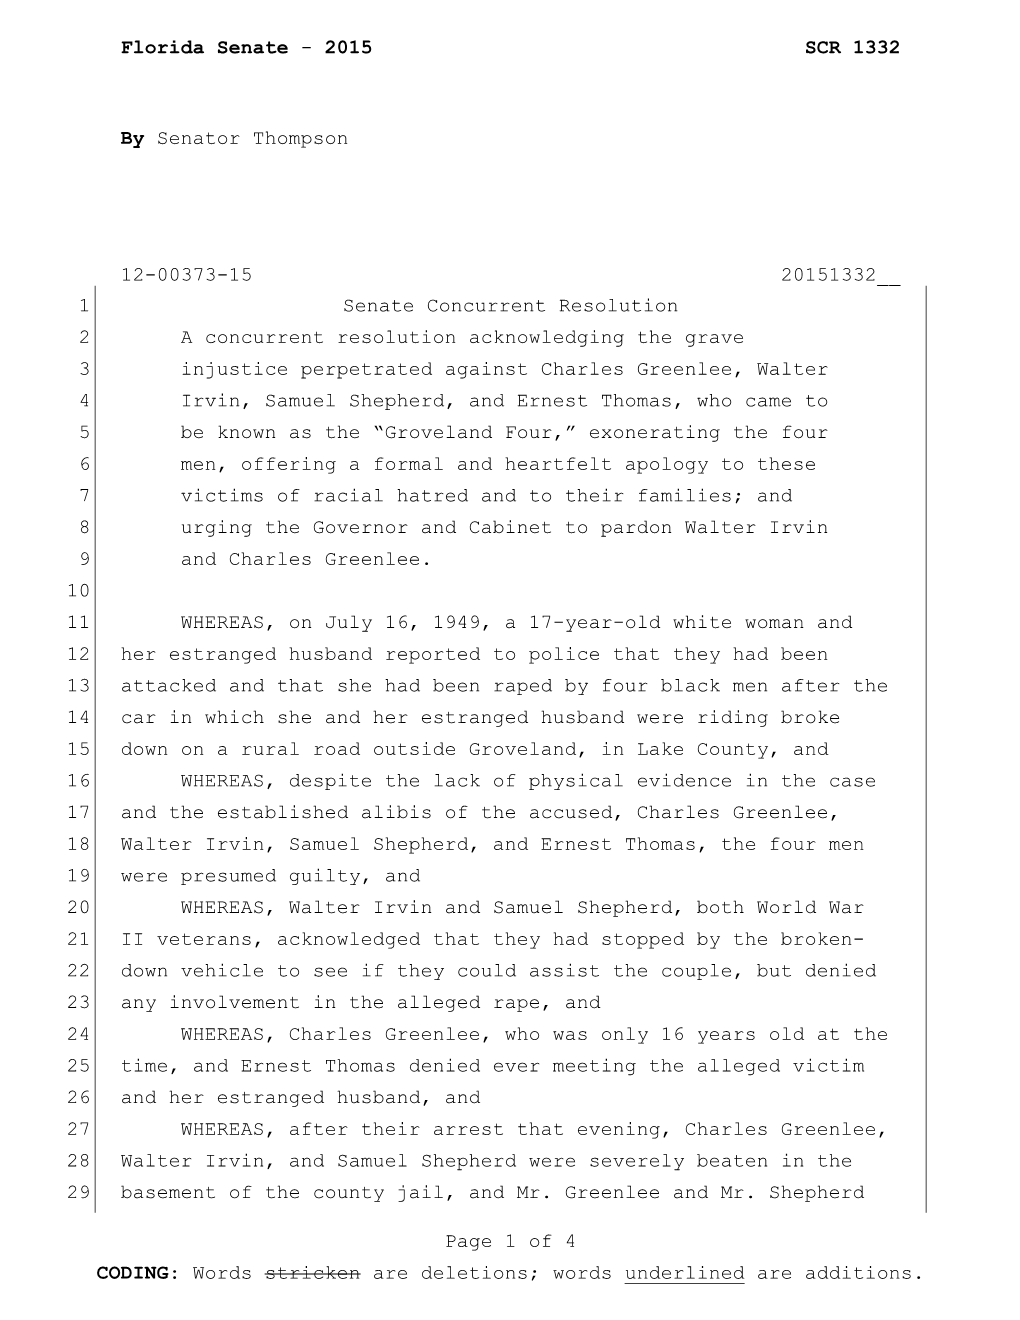 2015 SCR 1332 by Senator Thompson 12-00373-15 20151332__ Page 1 of 4 CODING